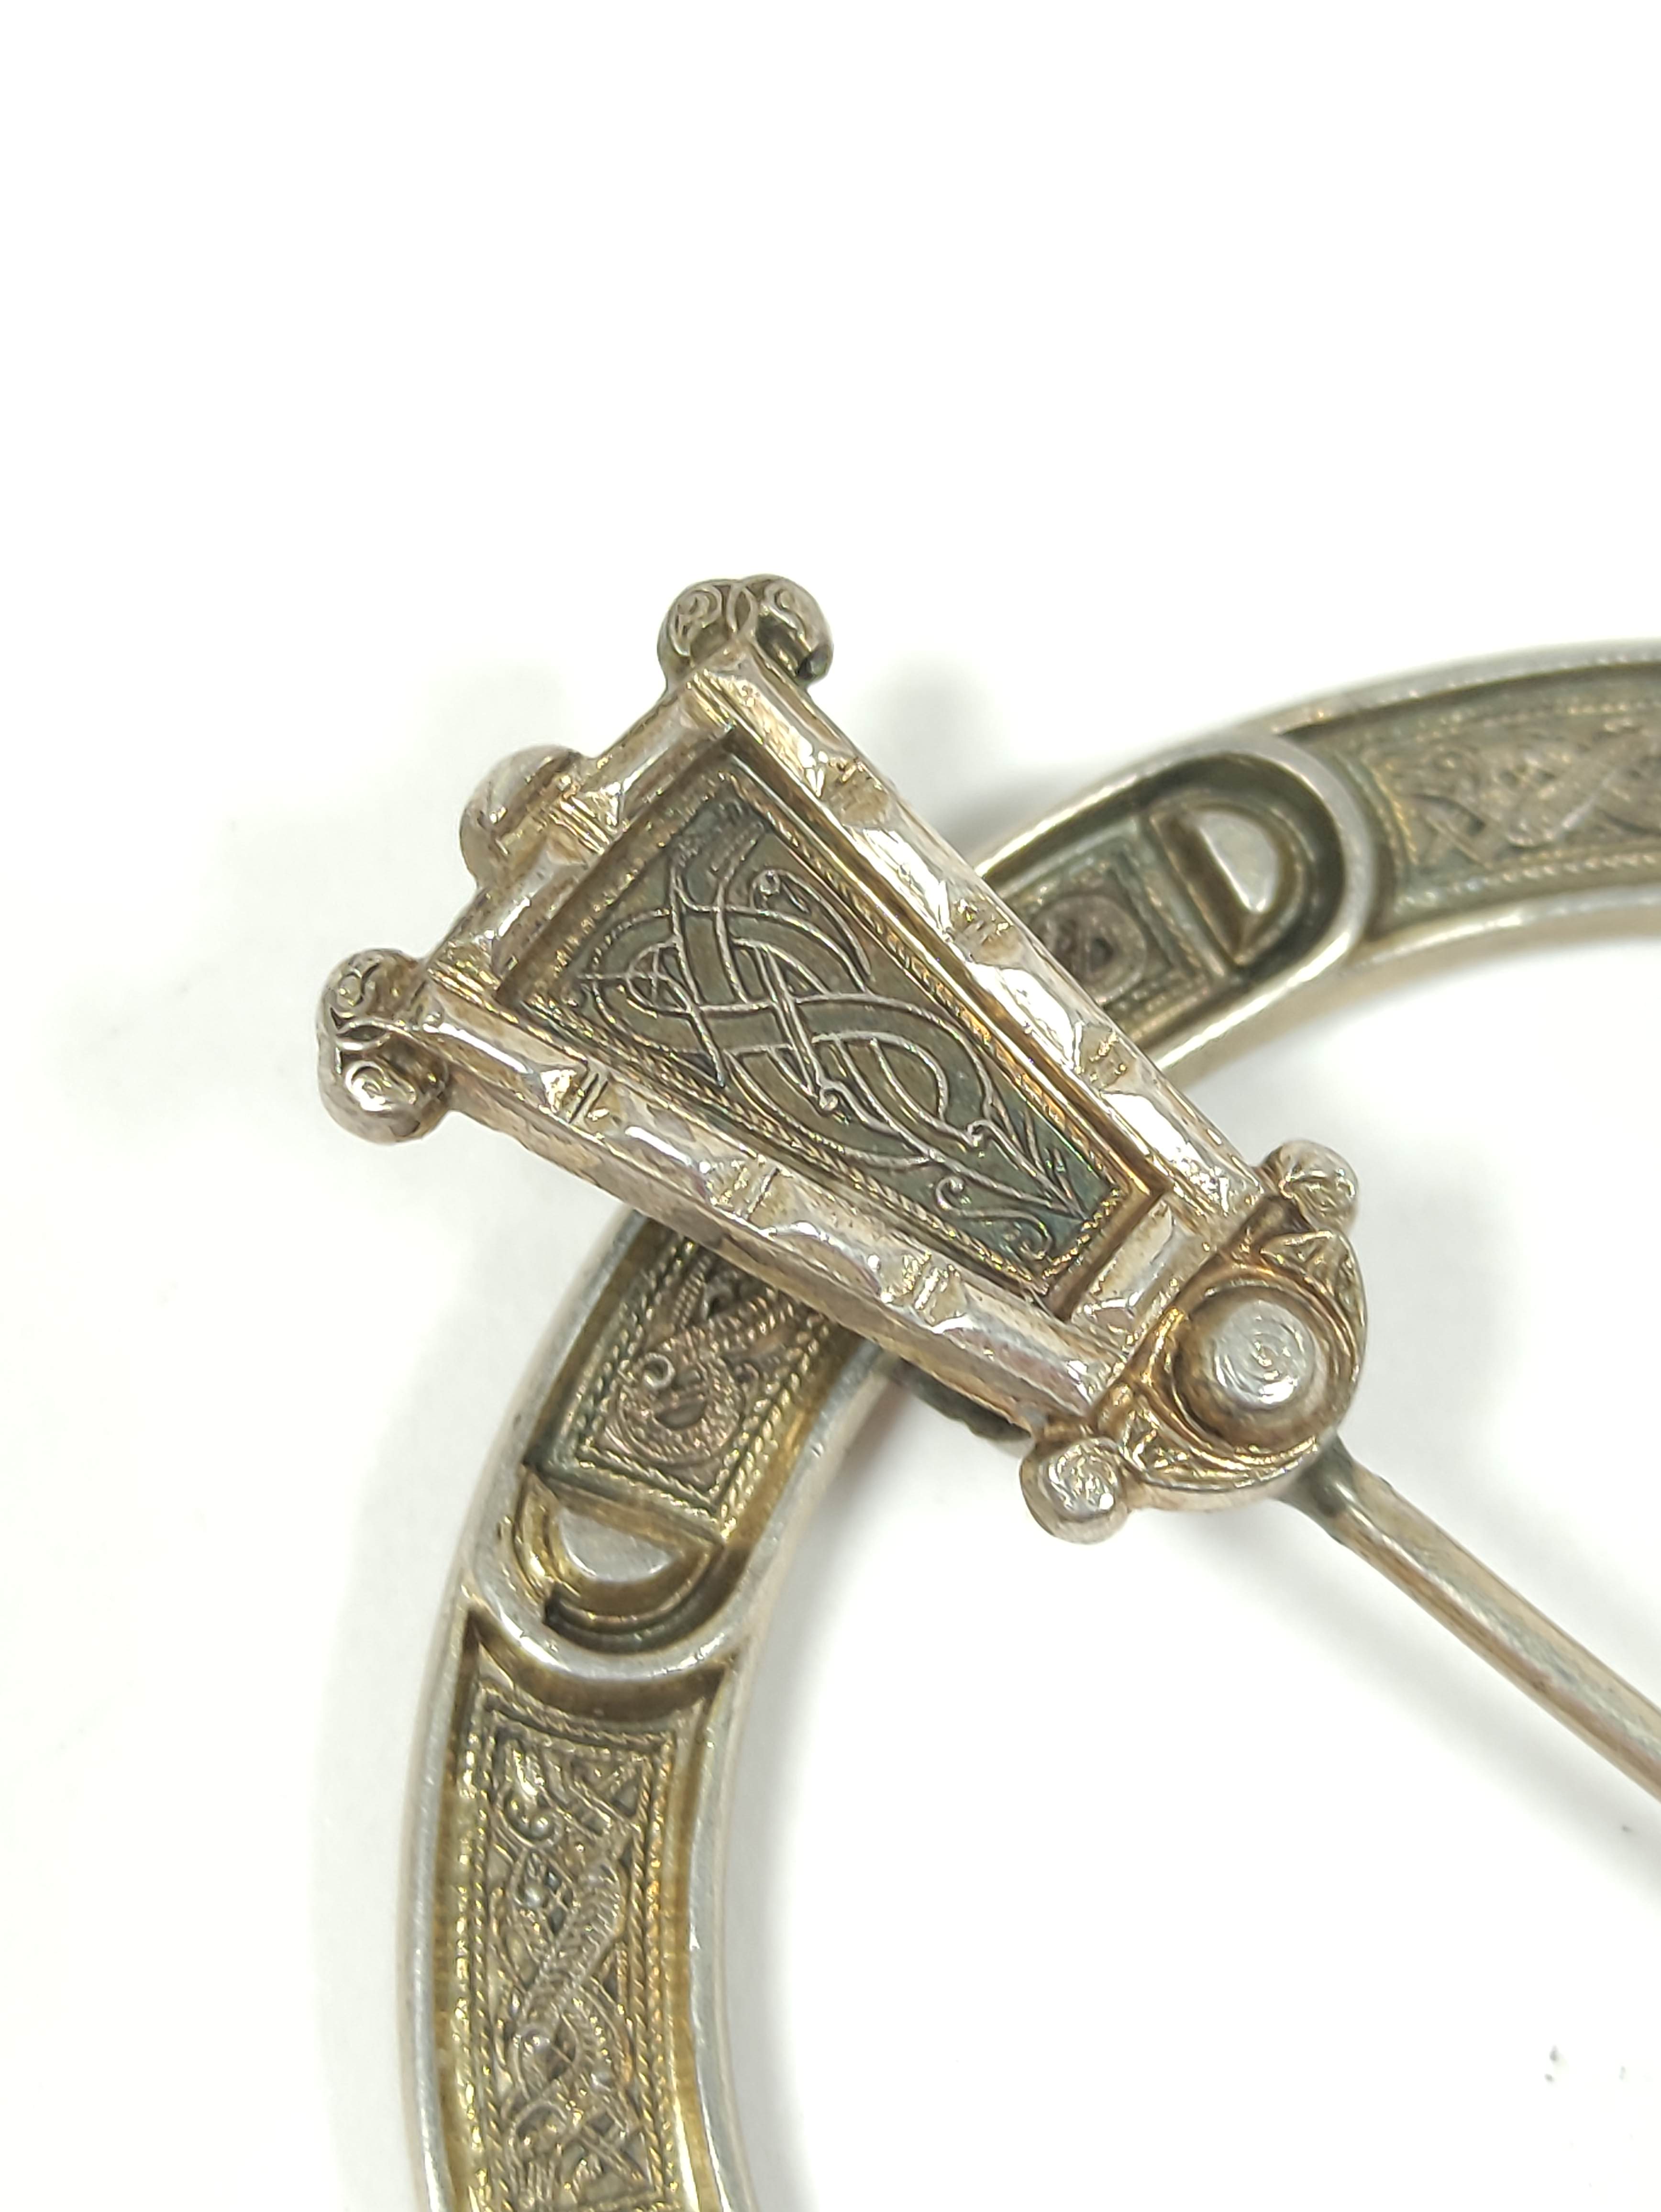 Silver gilt penannular pin, unmarked with embossed Celtic motifs and plain back, 70mm. - Image 2 of 4